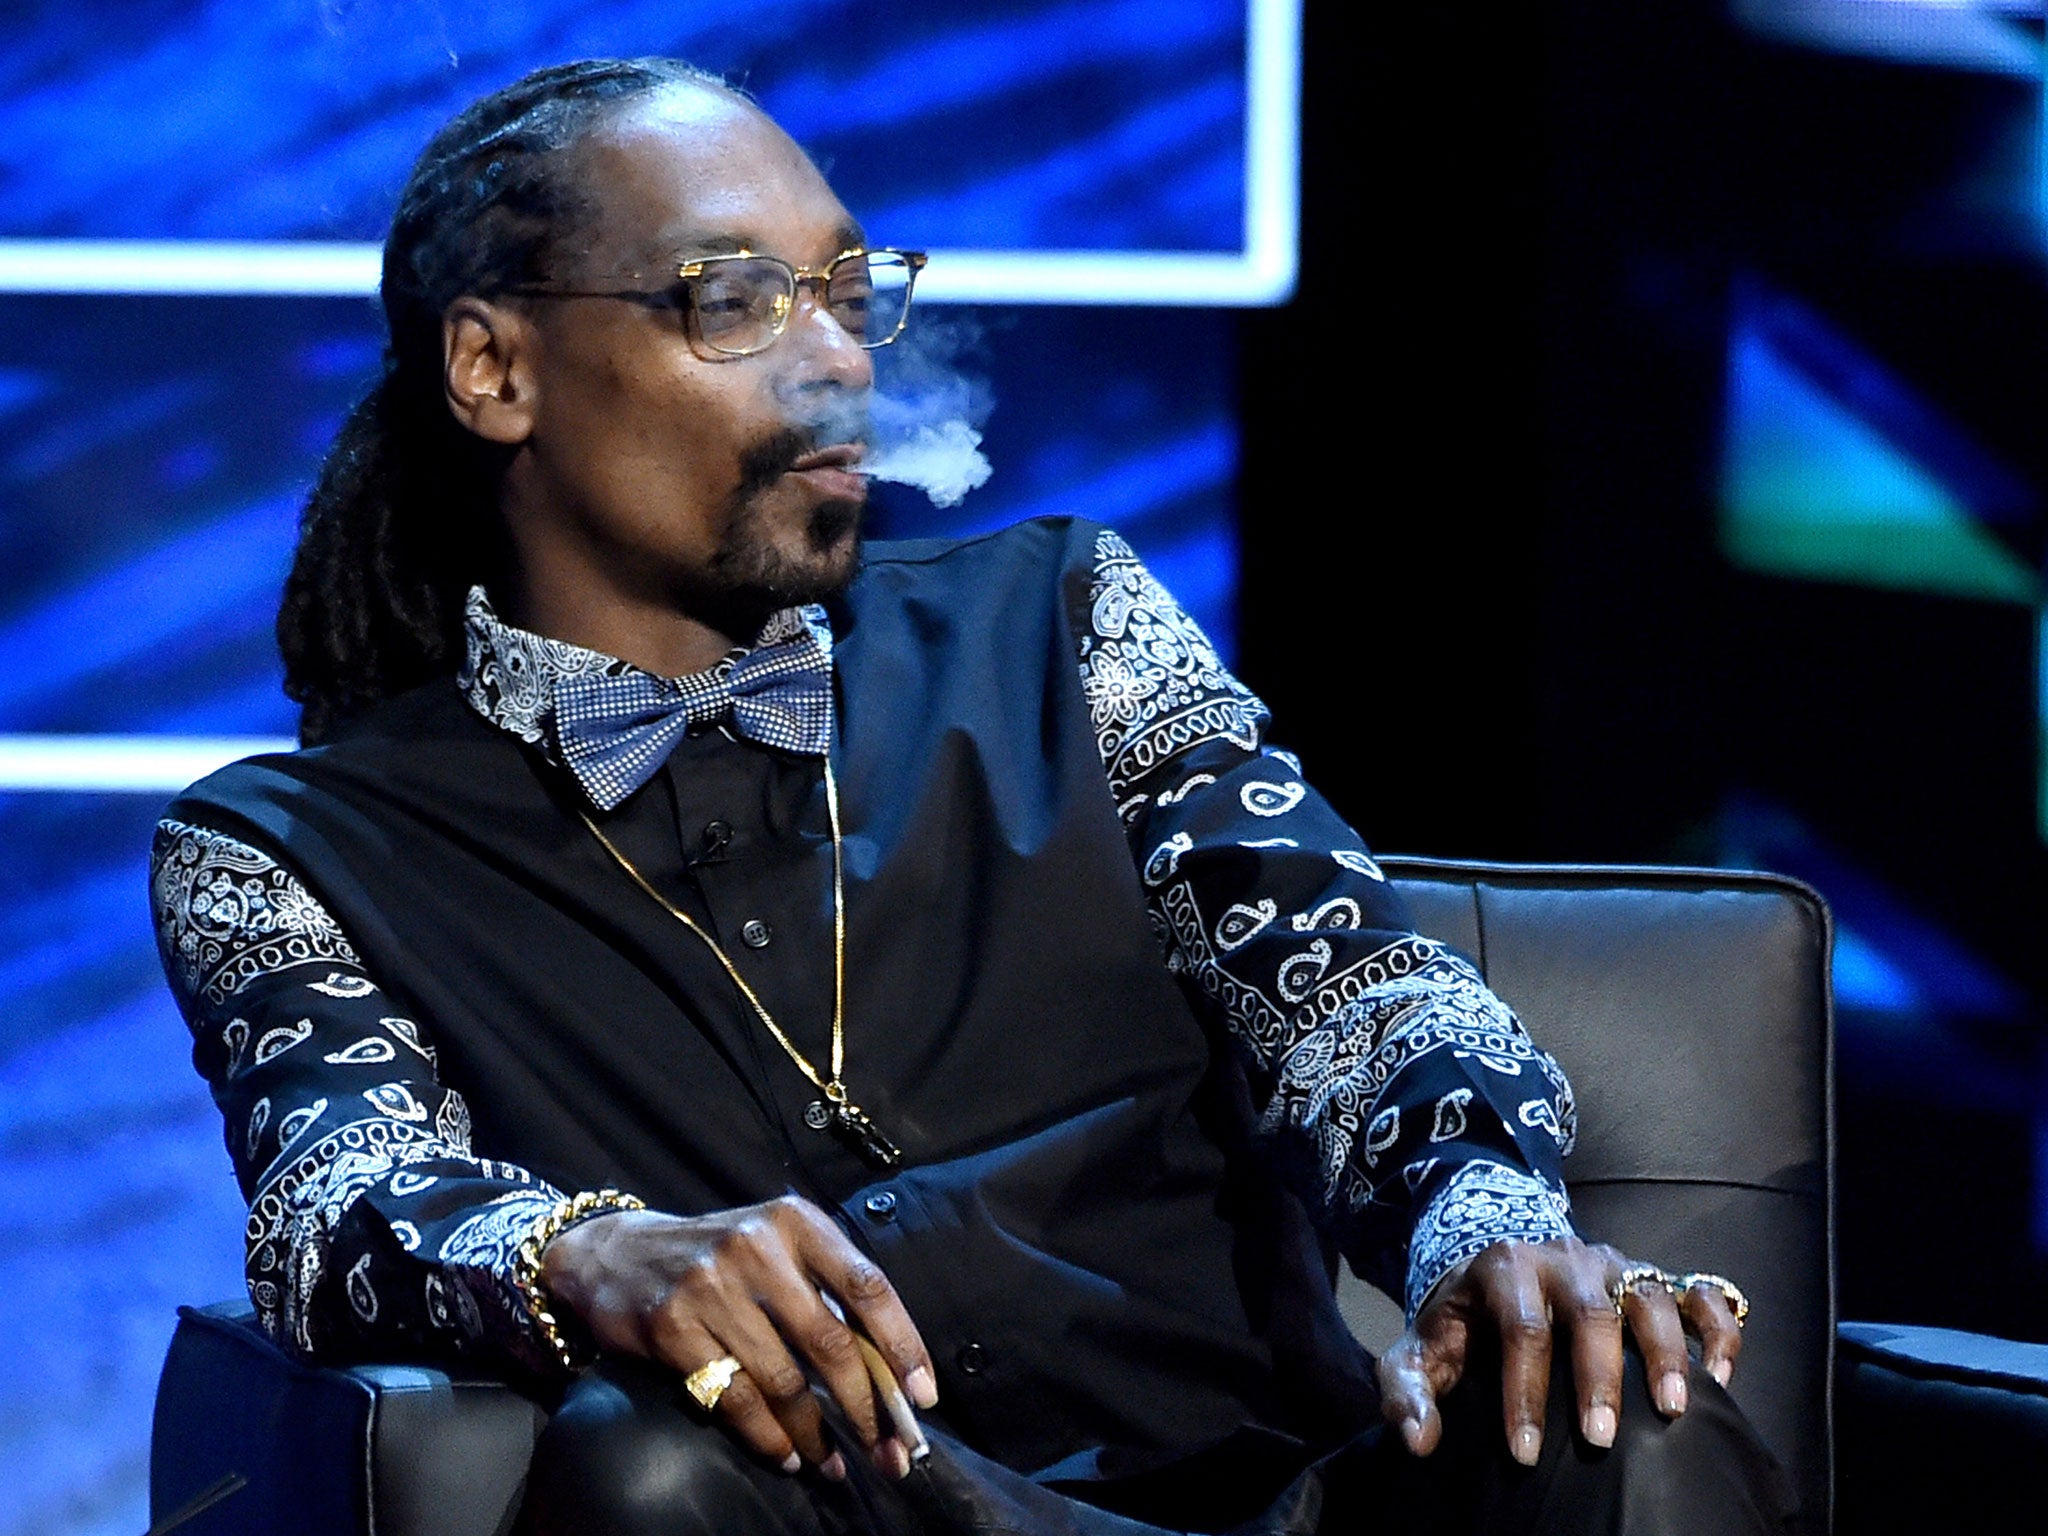 Rapper Snoop Dogg appears onstage at the Comedy Central Roast of Justin Bieber at Sony Studios in Culver City, California